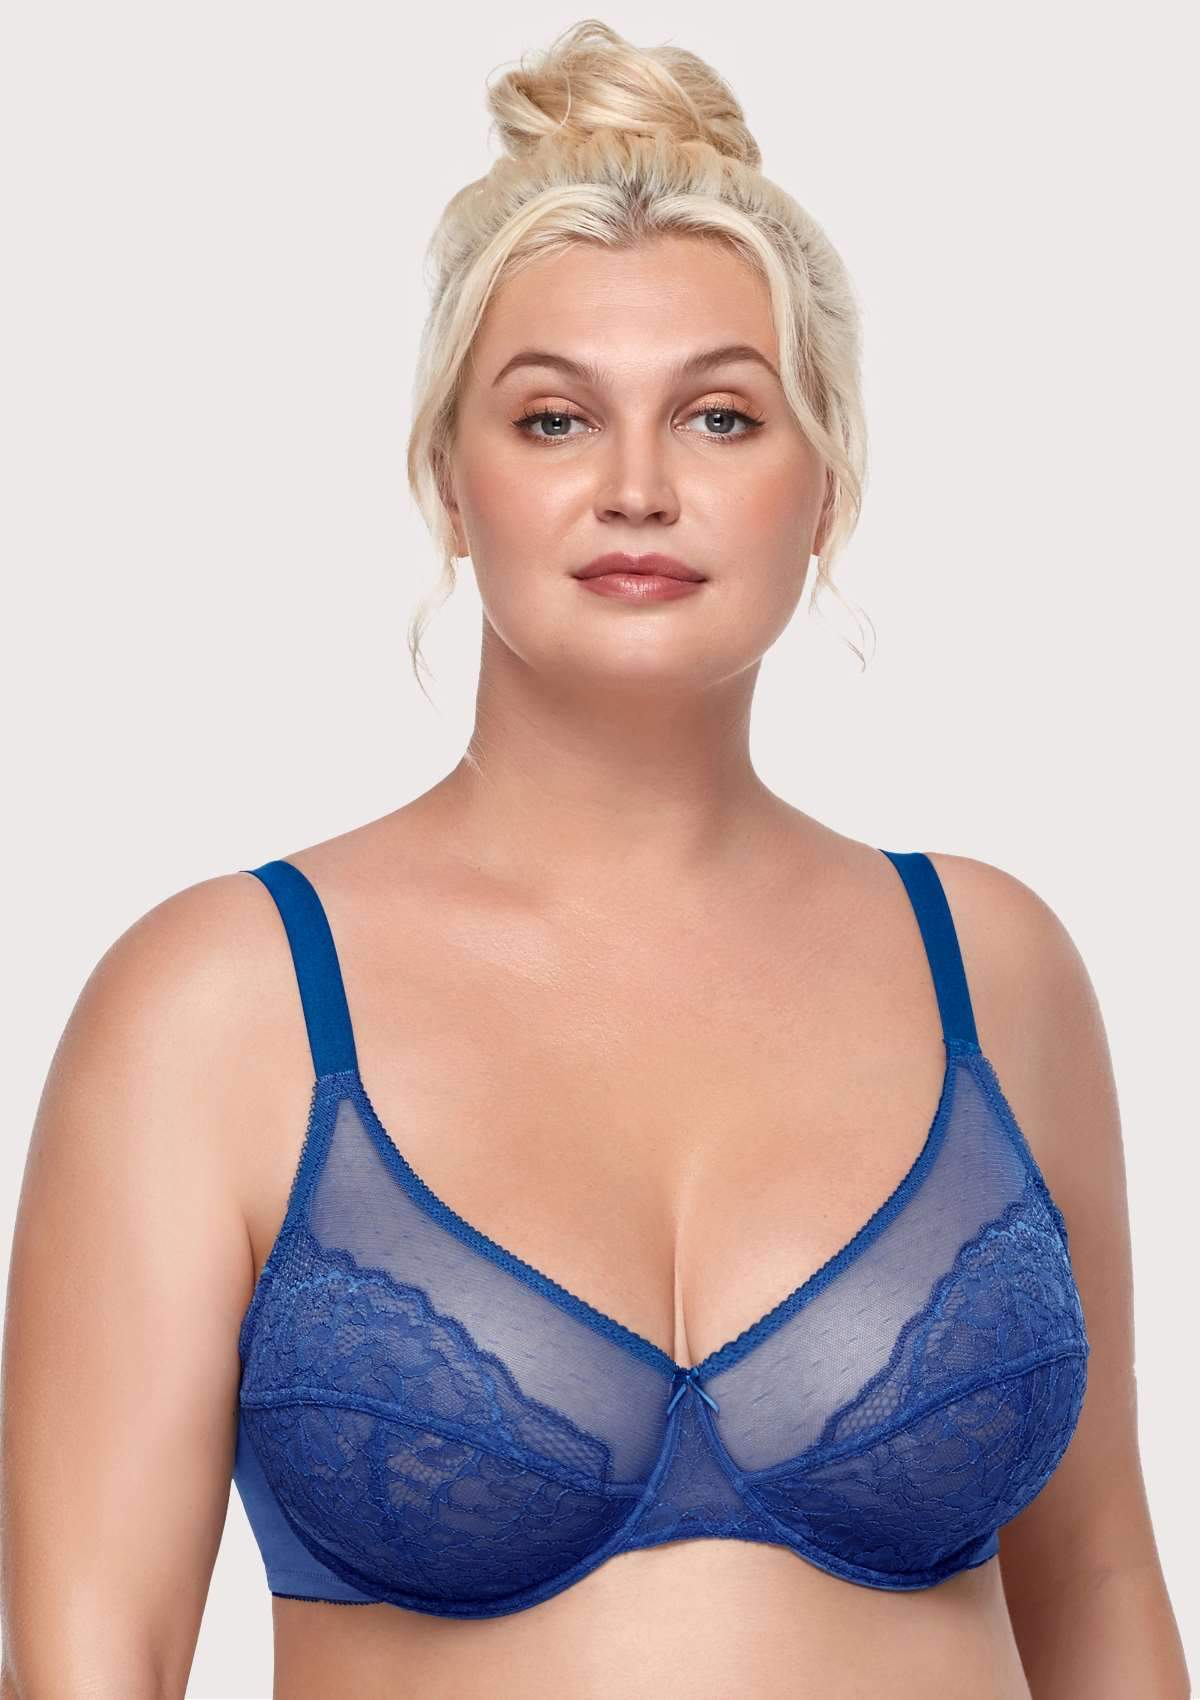 HSIA Enchante Full Coverage Bra: Supportive Bra For Big Busts - Royal Blue / 36 / DD/E